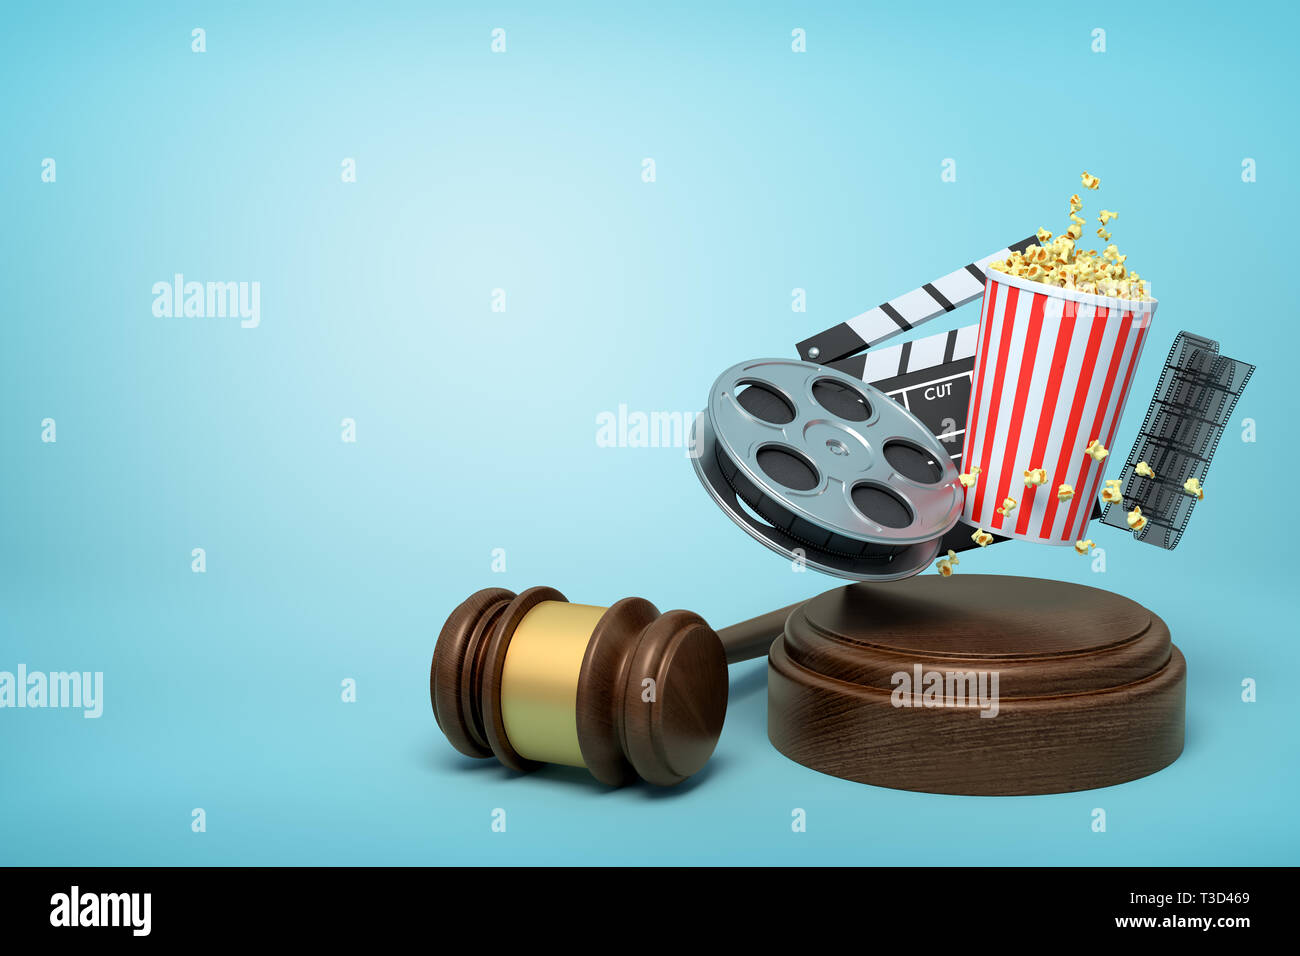 3d rendering of film reel, popcorn bucket, and clapperboard suspended in air above sound block with gavel beside on blue background with copy space. Stock Photo